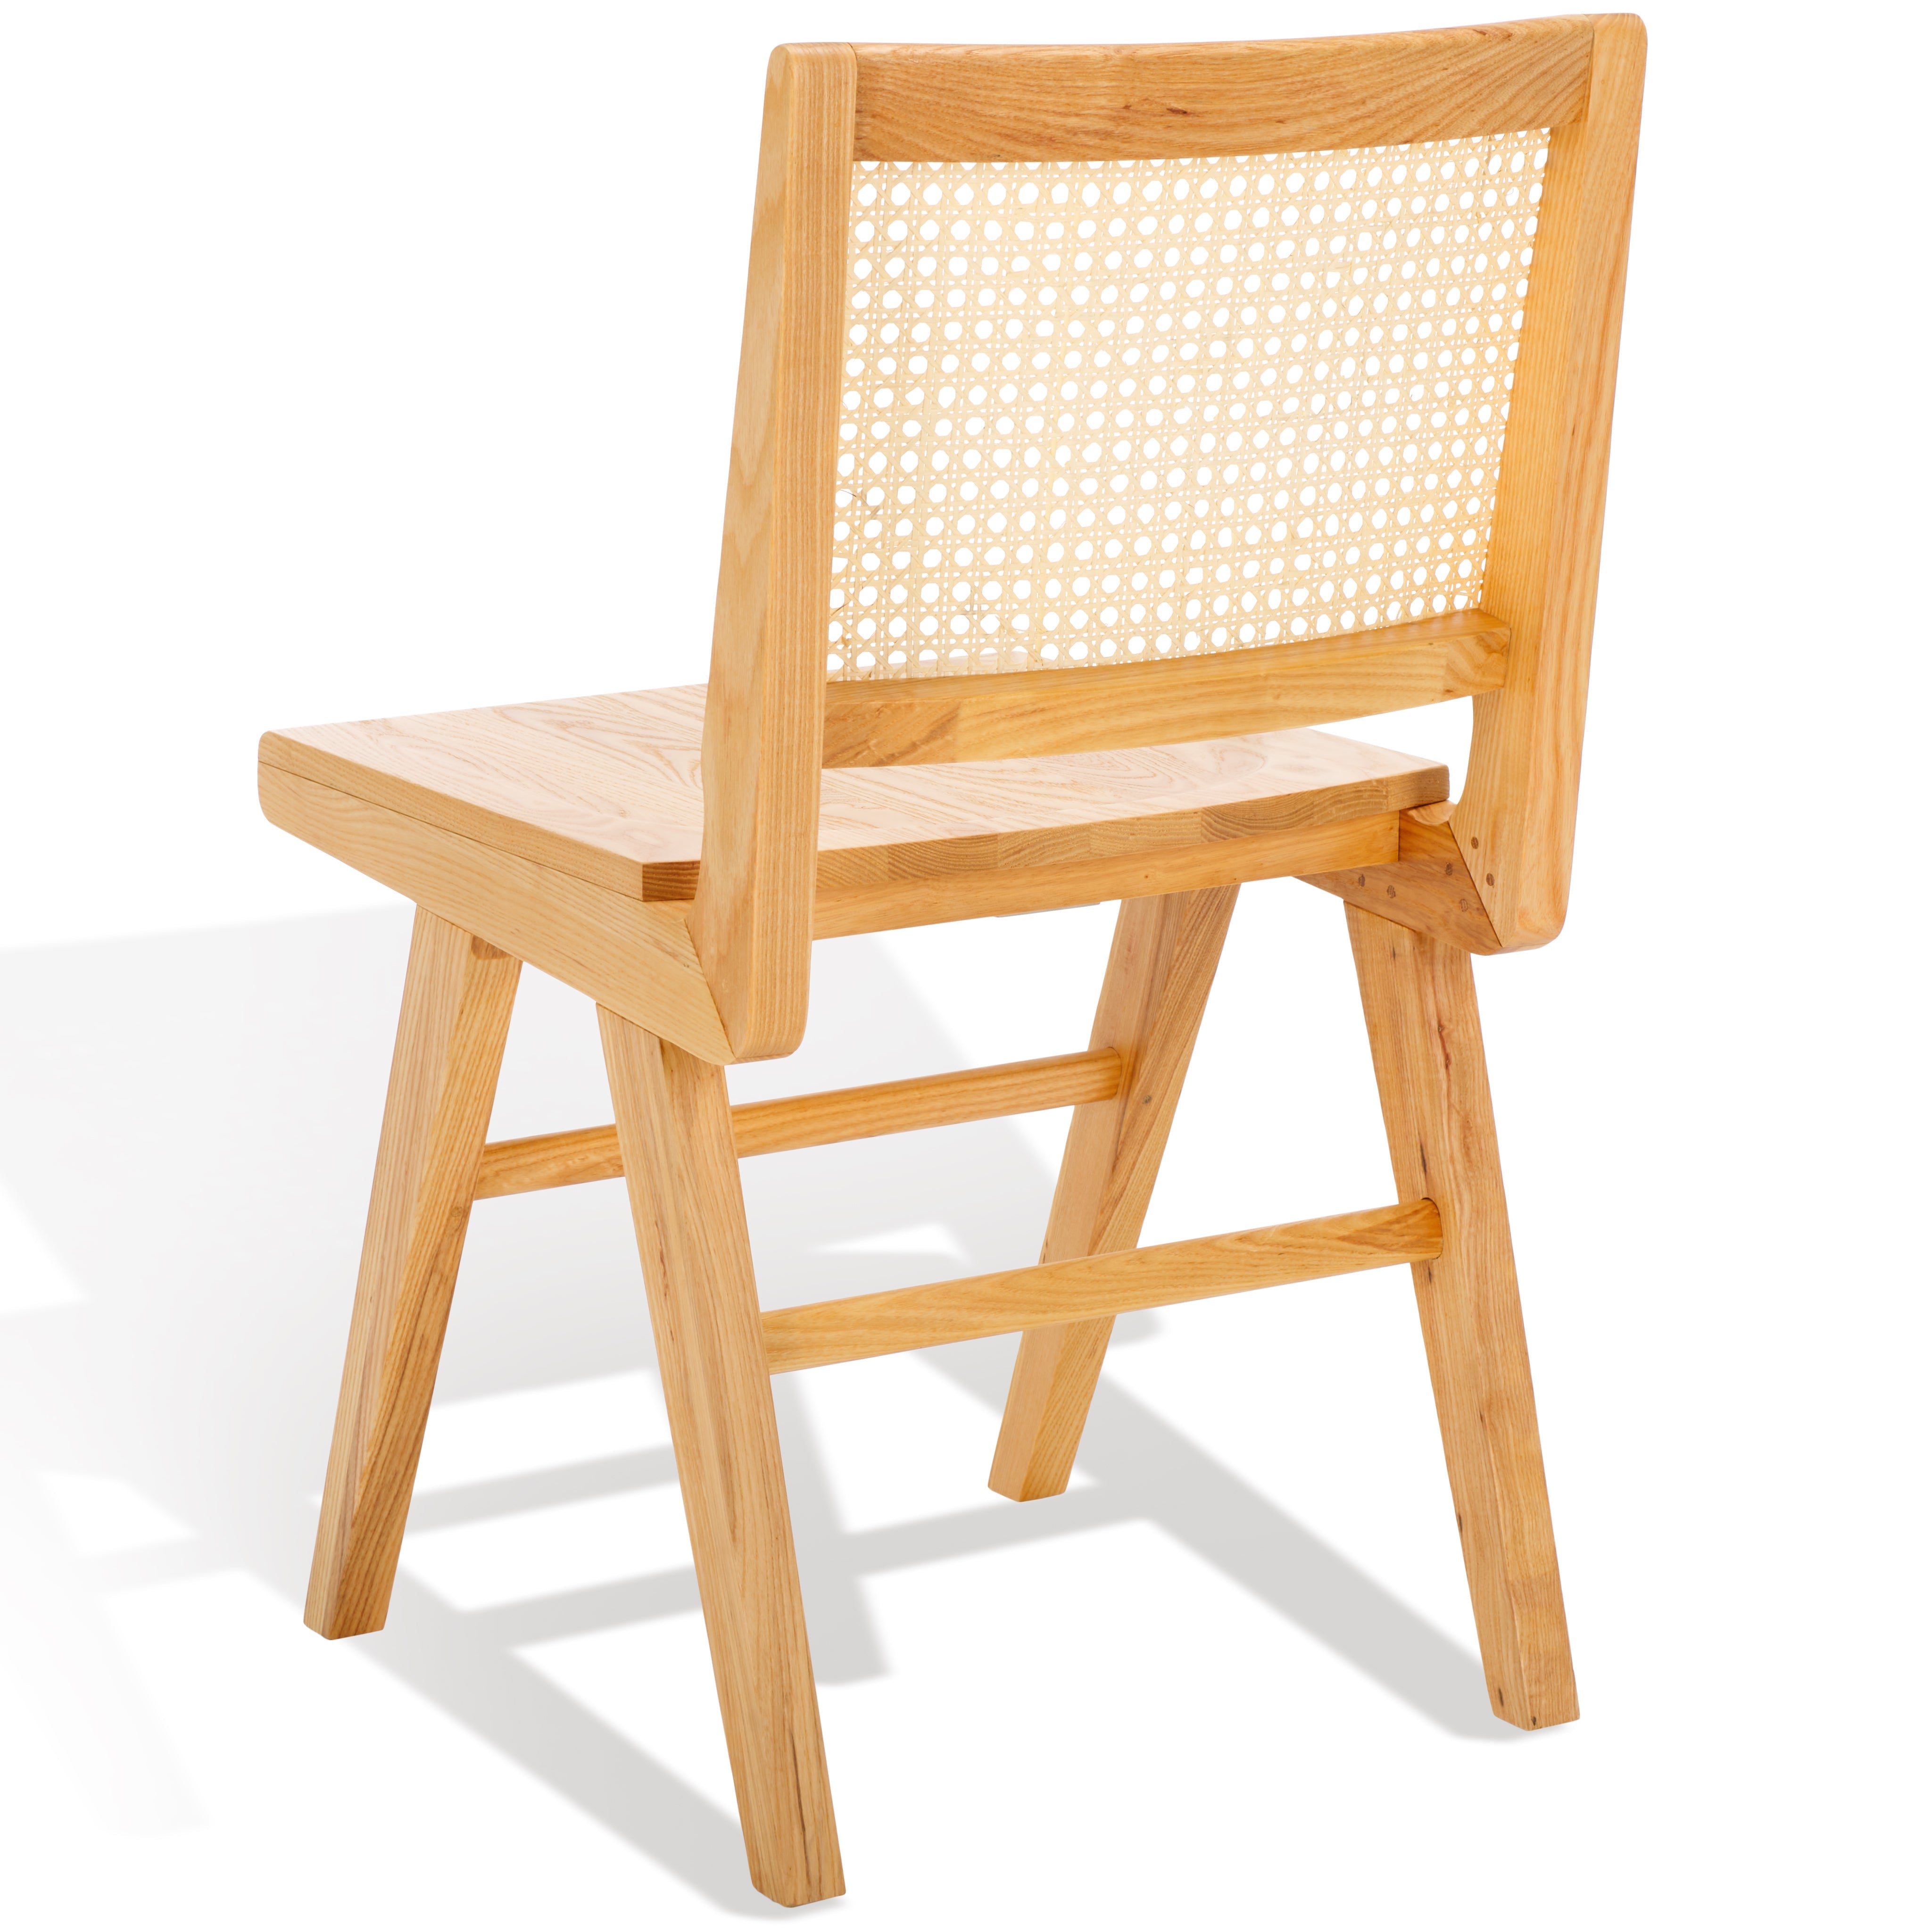 safavieh couture hattie french cane wood seat dining chair, sfv4153 - Natural